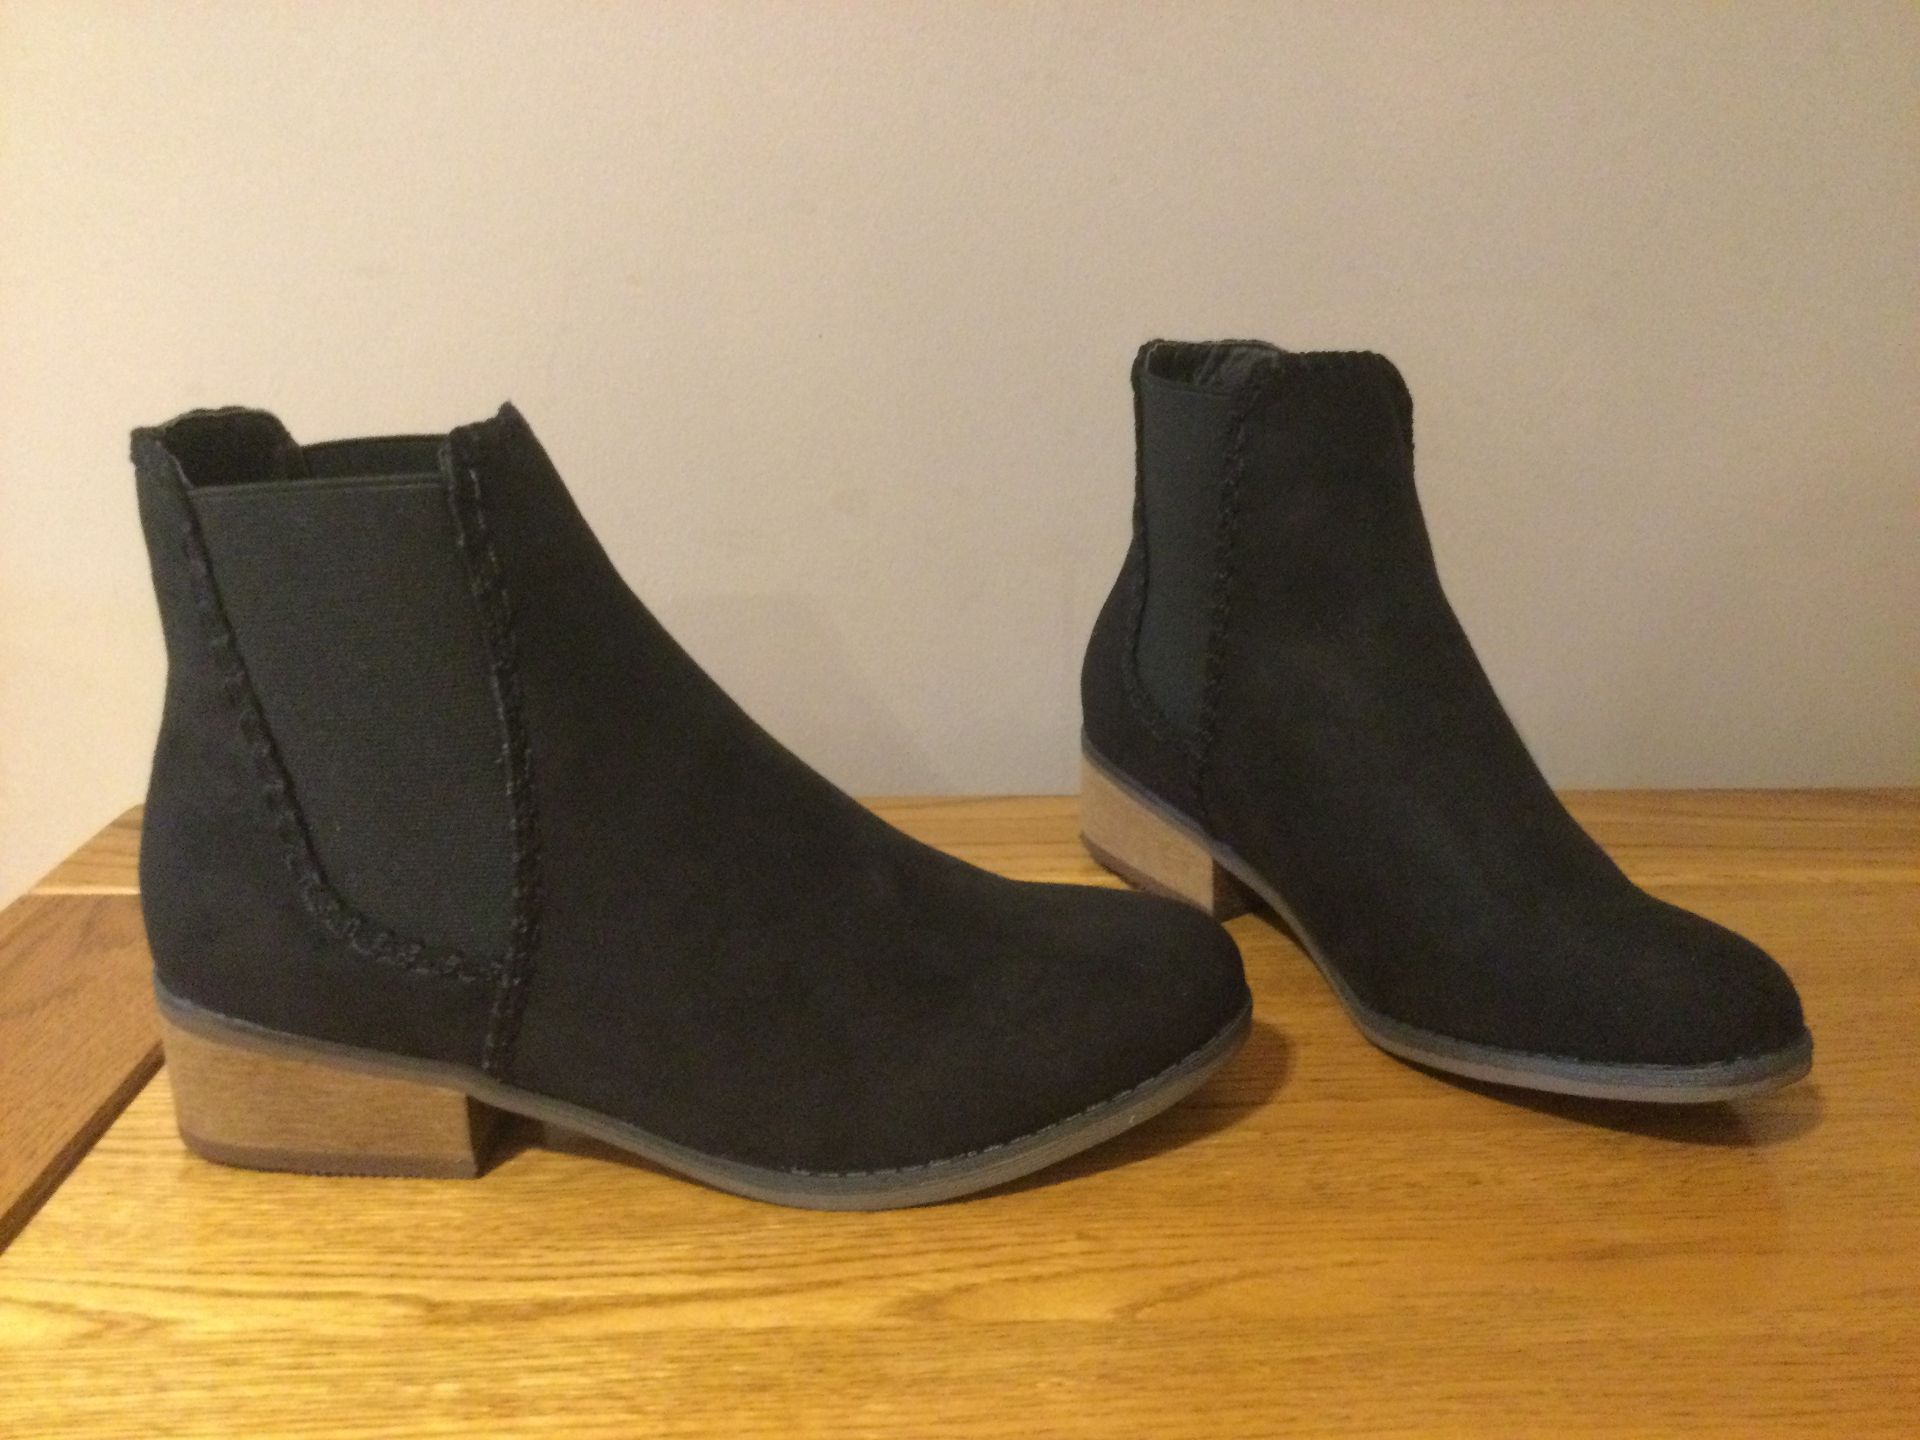 Dolcis “Pasha” Low Heel Ankle Boots, Size 4, Black - New RRP £45.99 - Image 3 of 6